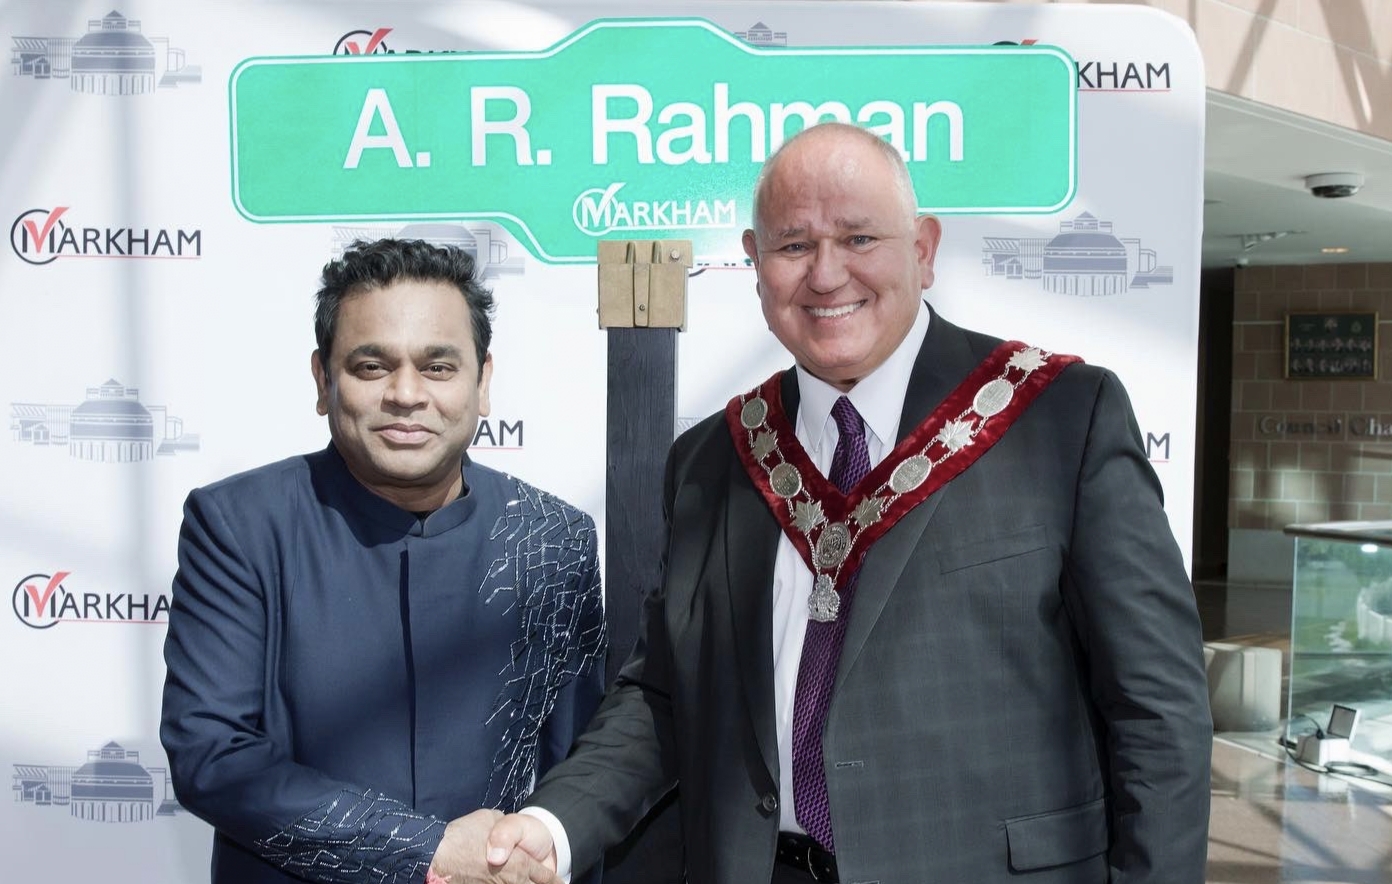 Street named after famous Indian musician AR Rahman in Canada